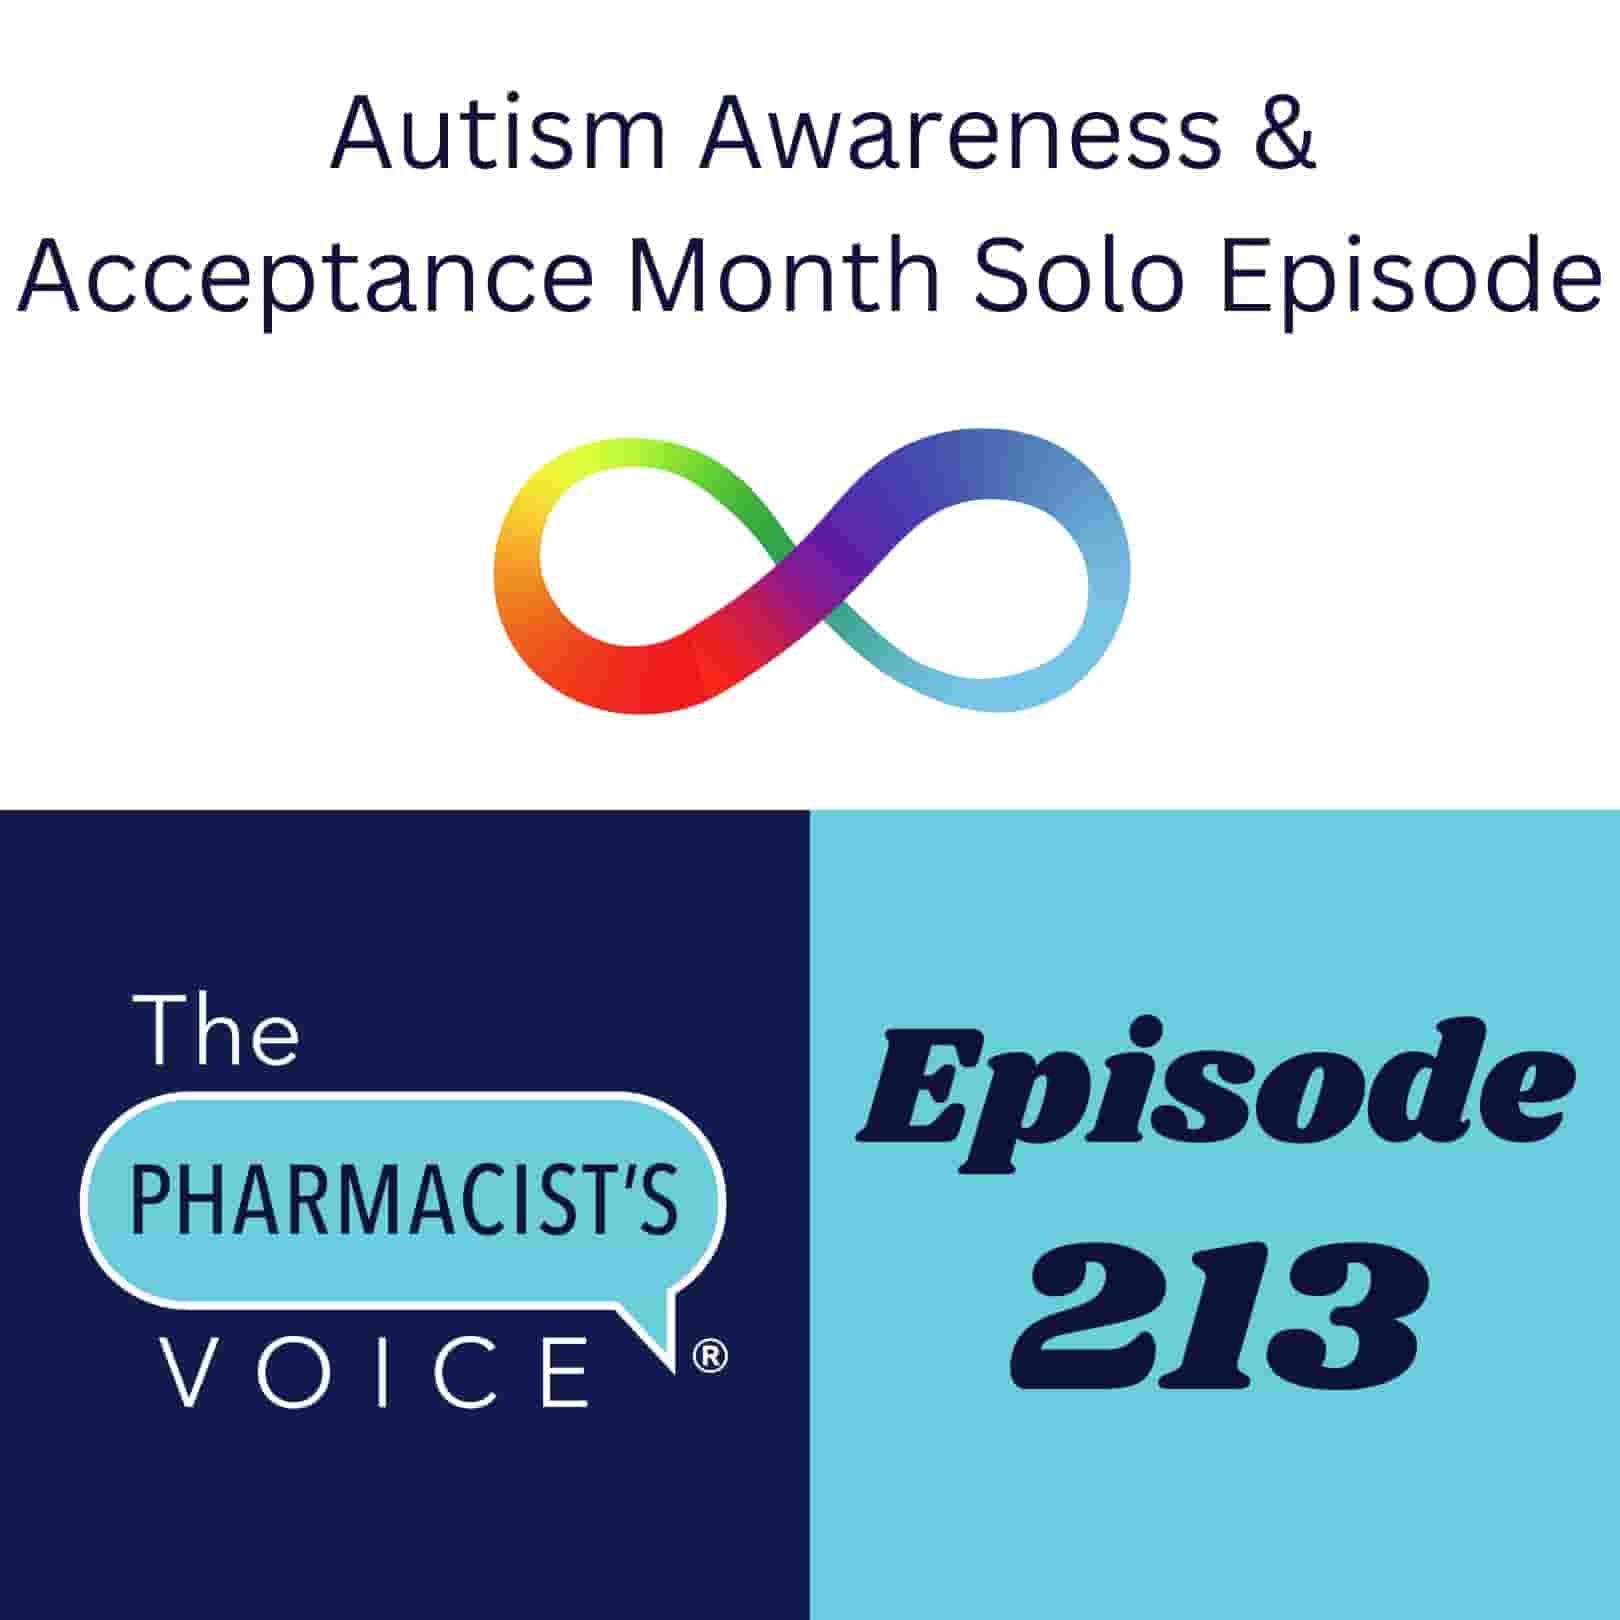 https://www.thepharmacistsvoice.com/podcast This is episode artwork for The Pharmacist's Voice Podcast episode 213